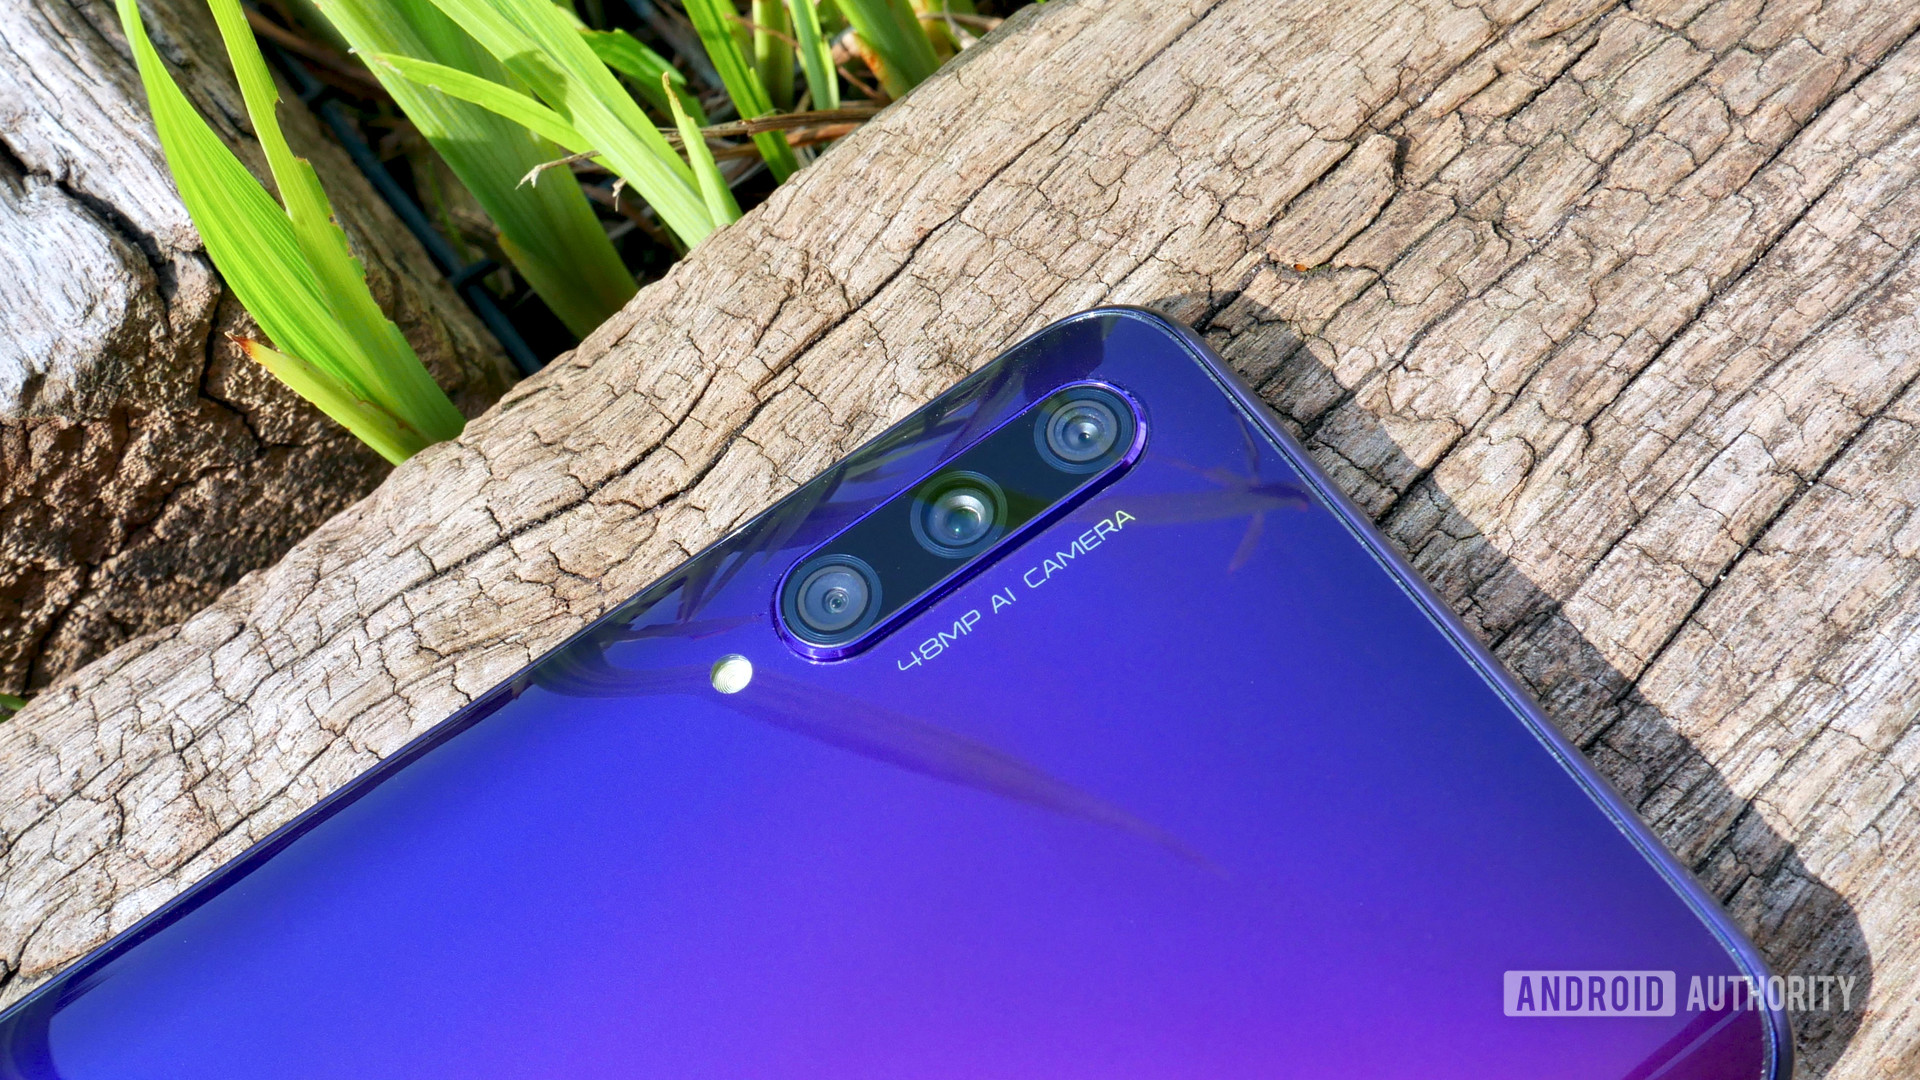 honor 9x pro review camera with AI, one of the smartphone marketing trips that needs to stop.